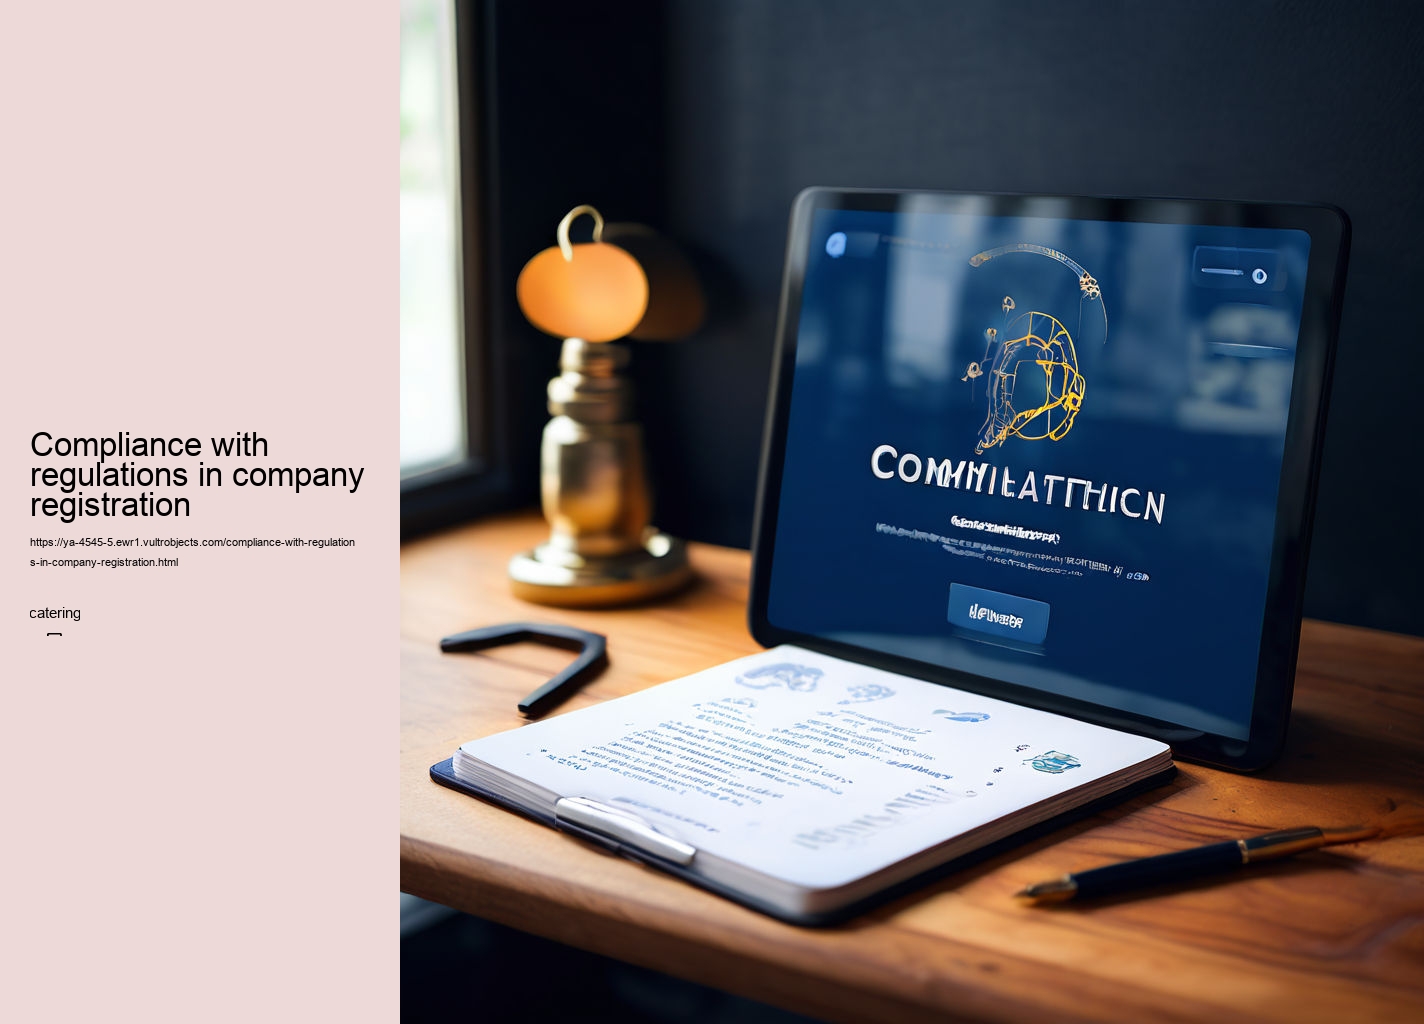 Compliance with regulations in company registration